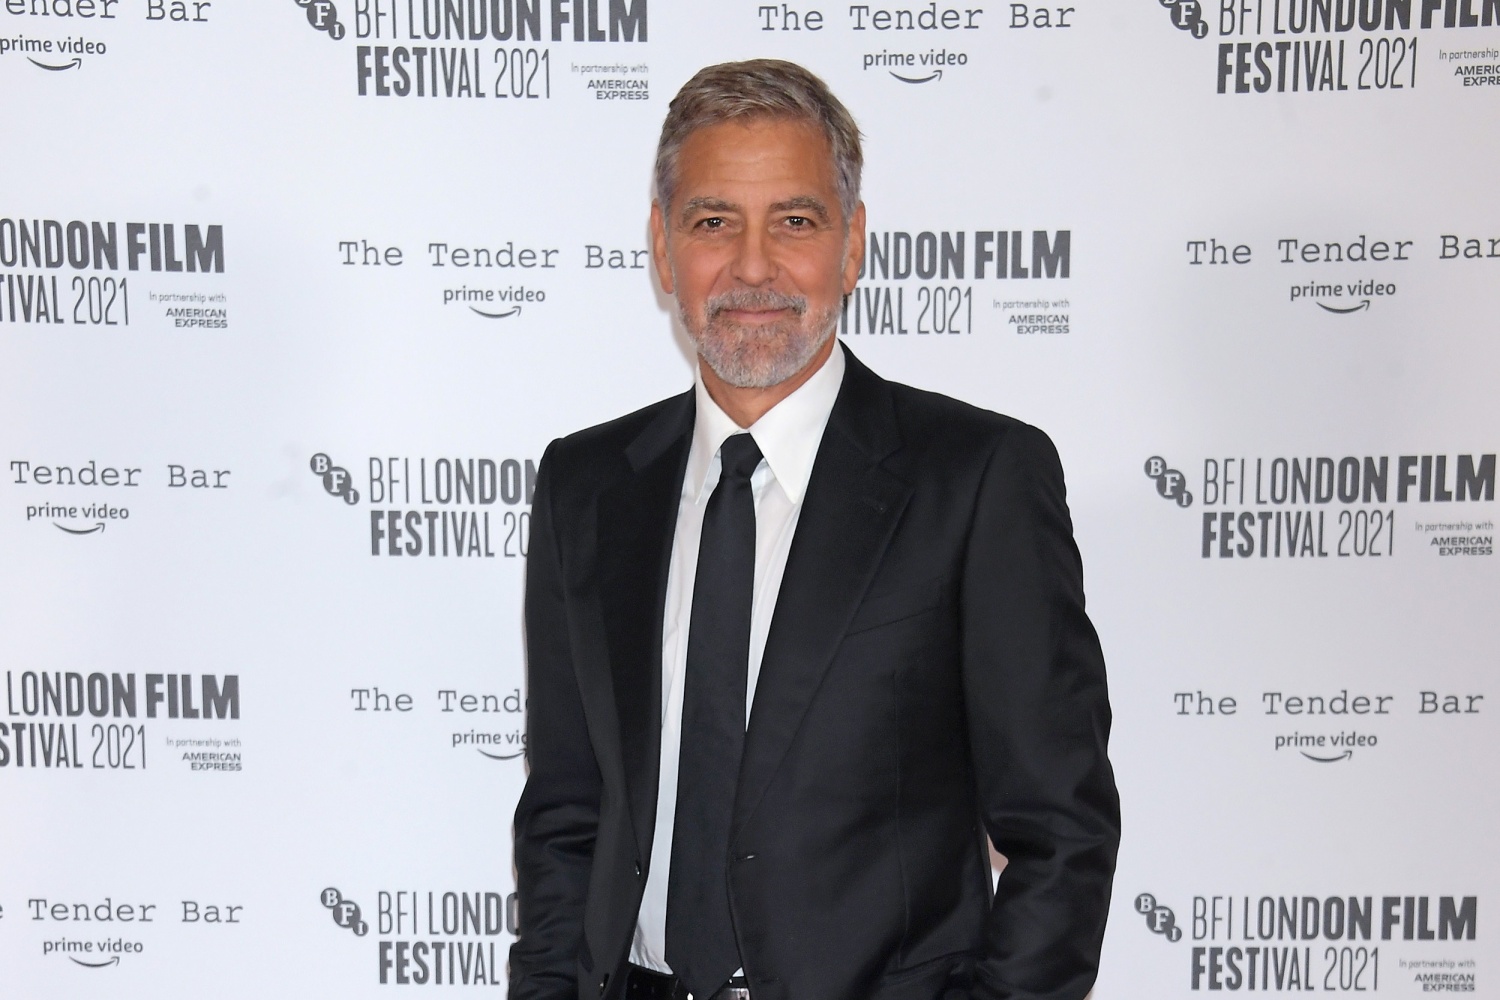 George Clooney attends the Premiere of "The Tender Bar" during the 65th BFI London Film Festival at The Royal Festival Hall on October 10, 2021 in London, England. 